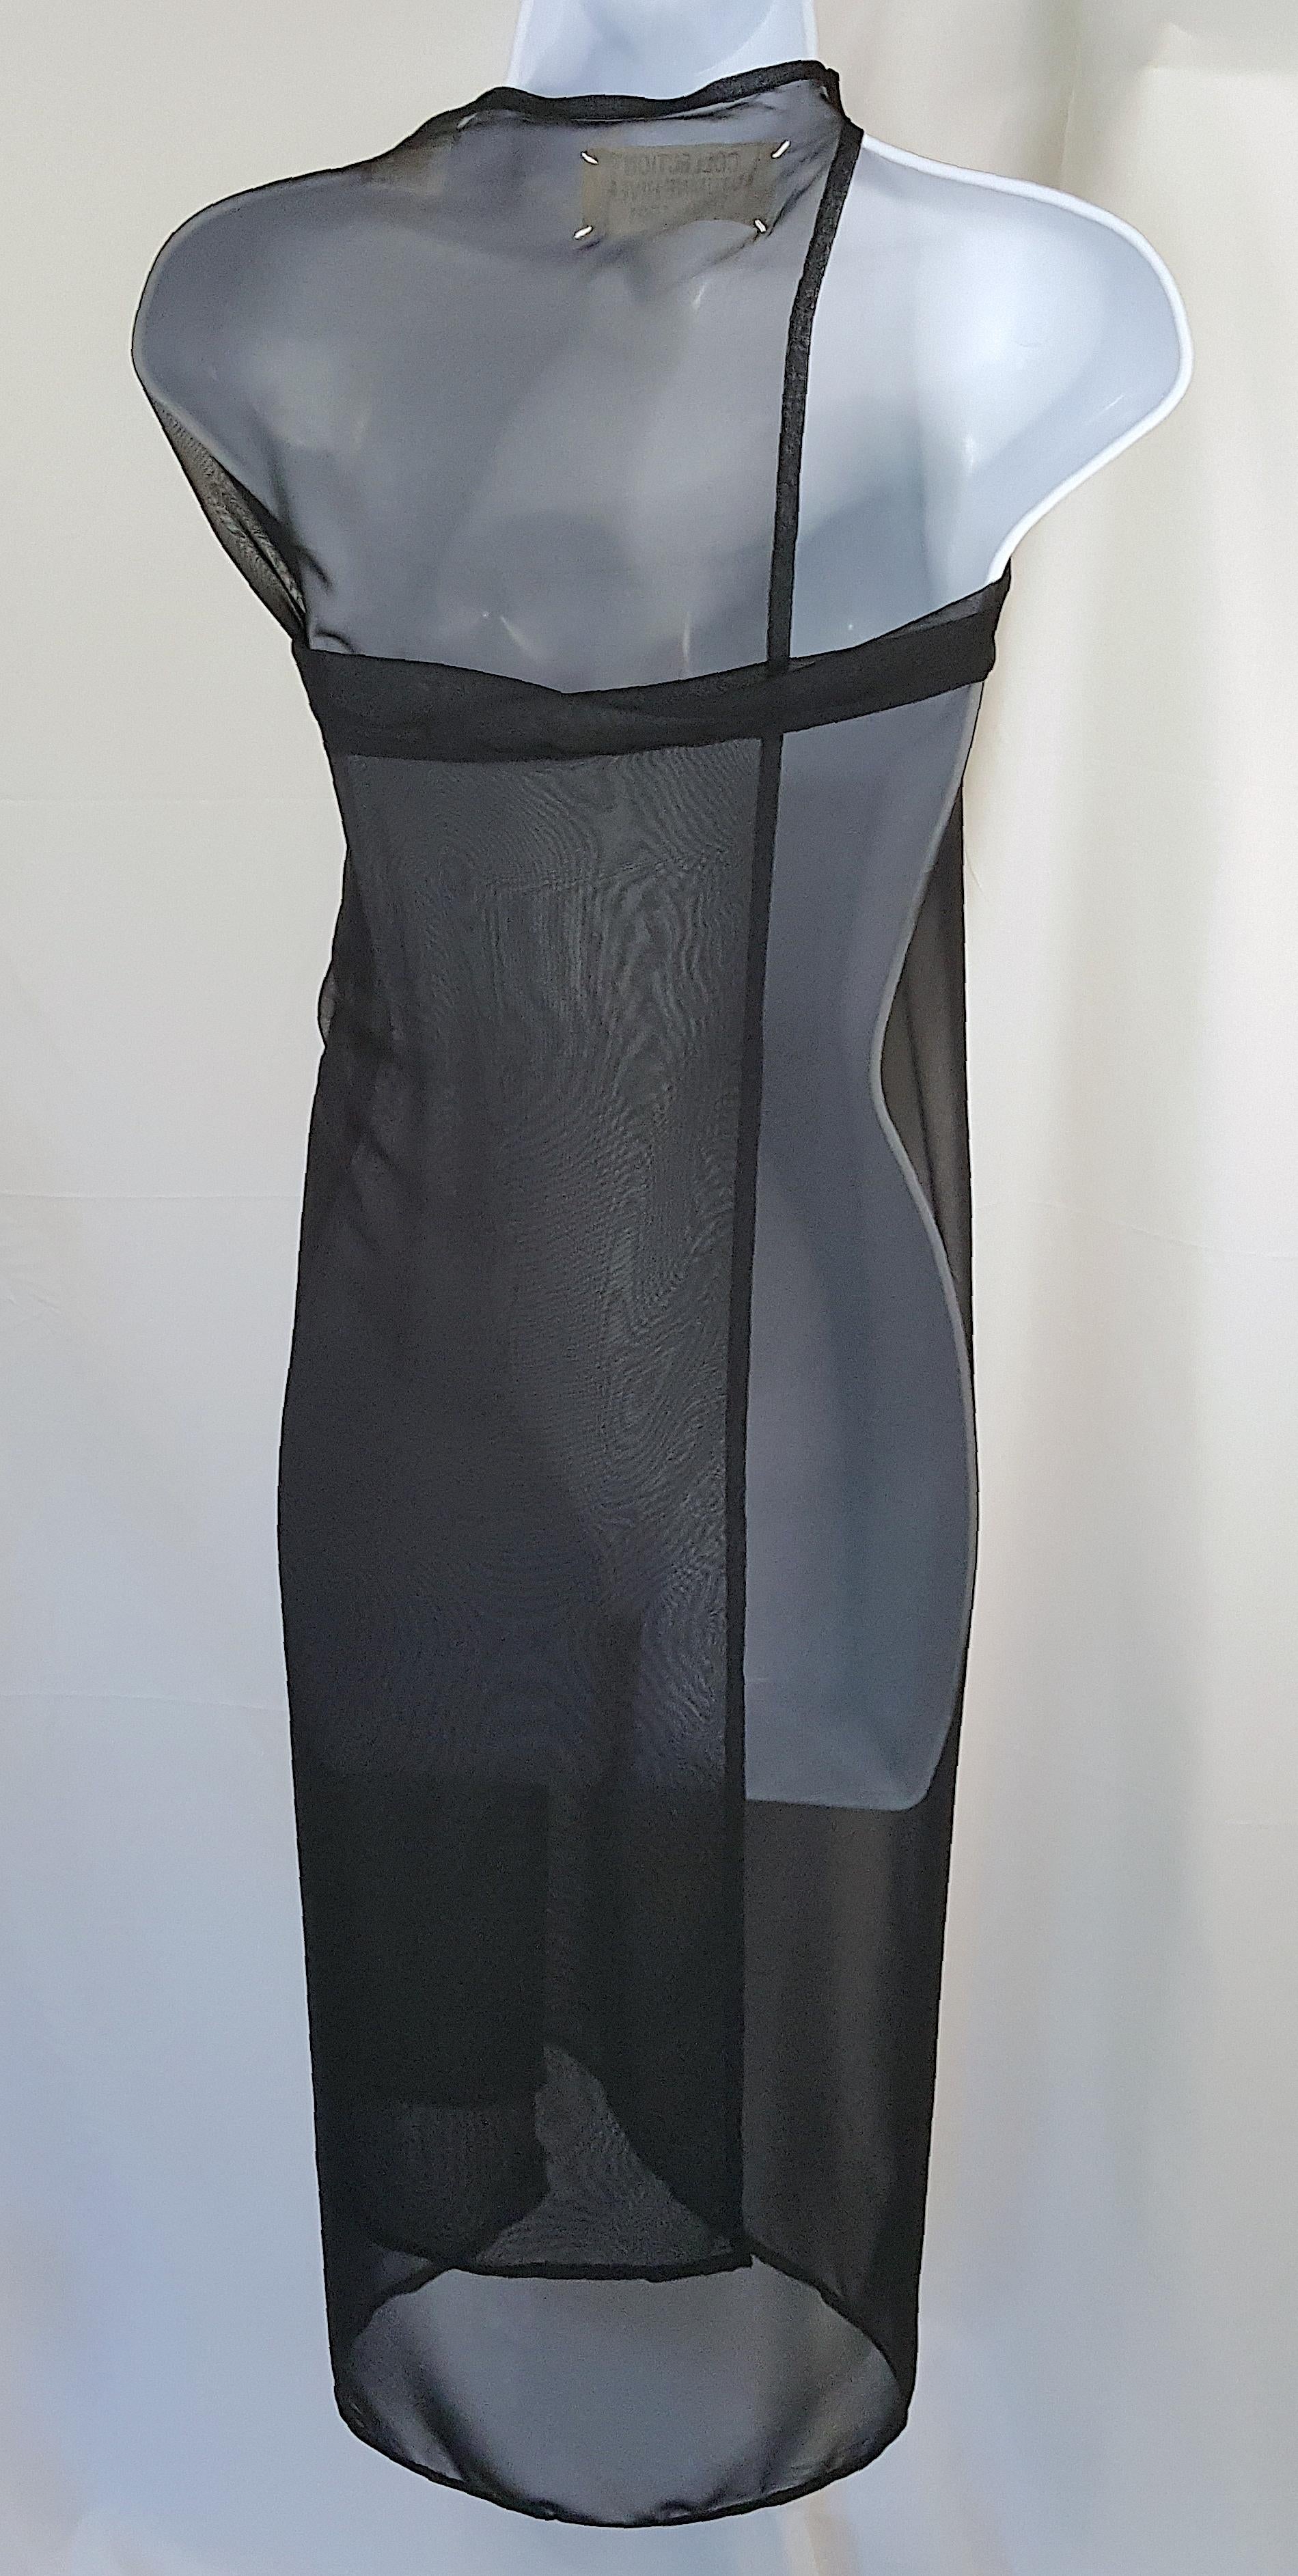 Dating this minimalist convertible transparent black chiffon rectangular garment by Belgian former fashion designer Martin Margiela to Spring 1994 among his many variations of the traditional waiter-style apron that he reworked with his eponymous